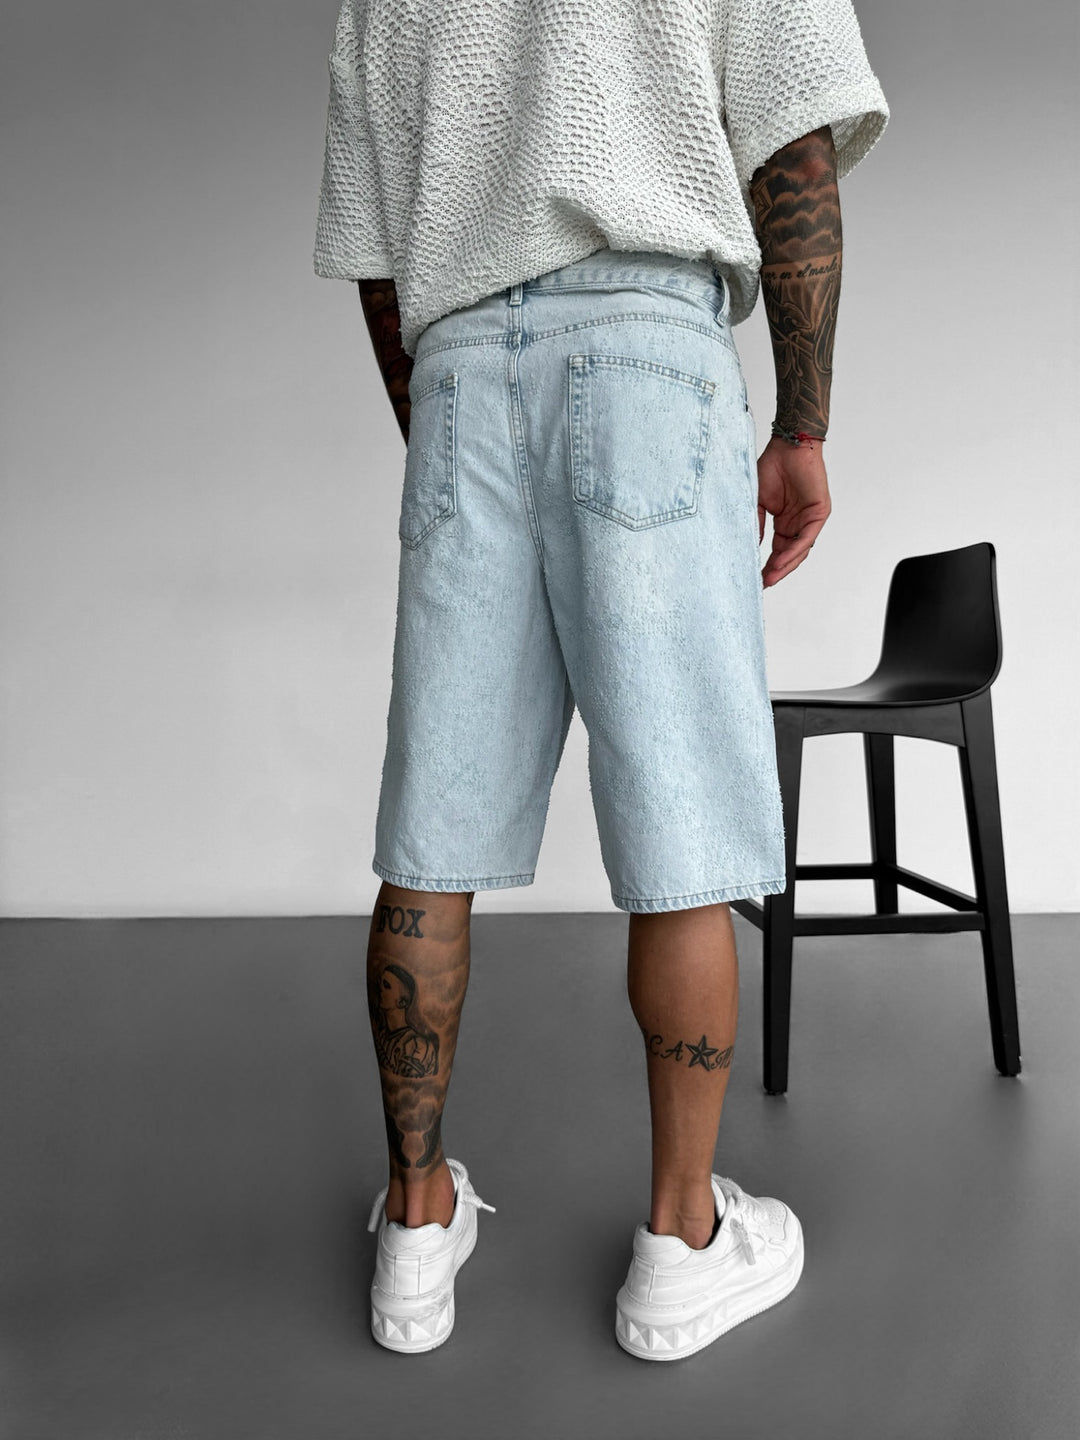 Loose Fit Scrubbed Out Jeans Shorts - Light Blue